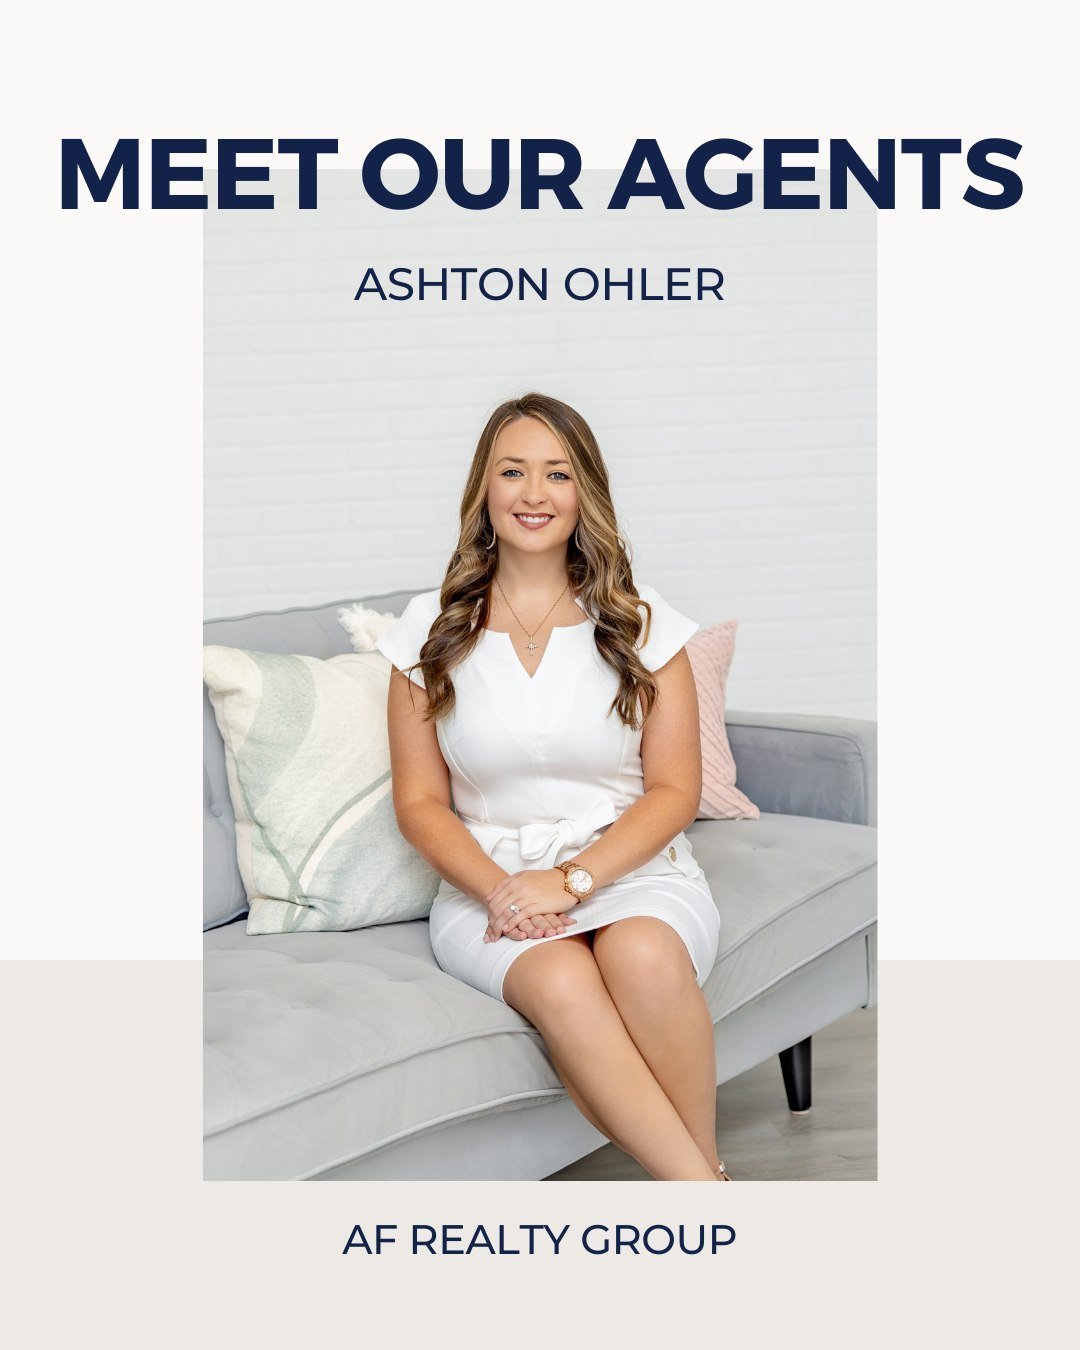 Introducing our amazing agents at AF Realty Group! 🏡 From seasoned experts to rising stars, each member of our AF family brings something unique and different to the table! These individuals go above and beyond, whether working with clients in their